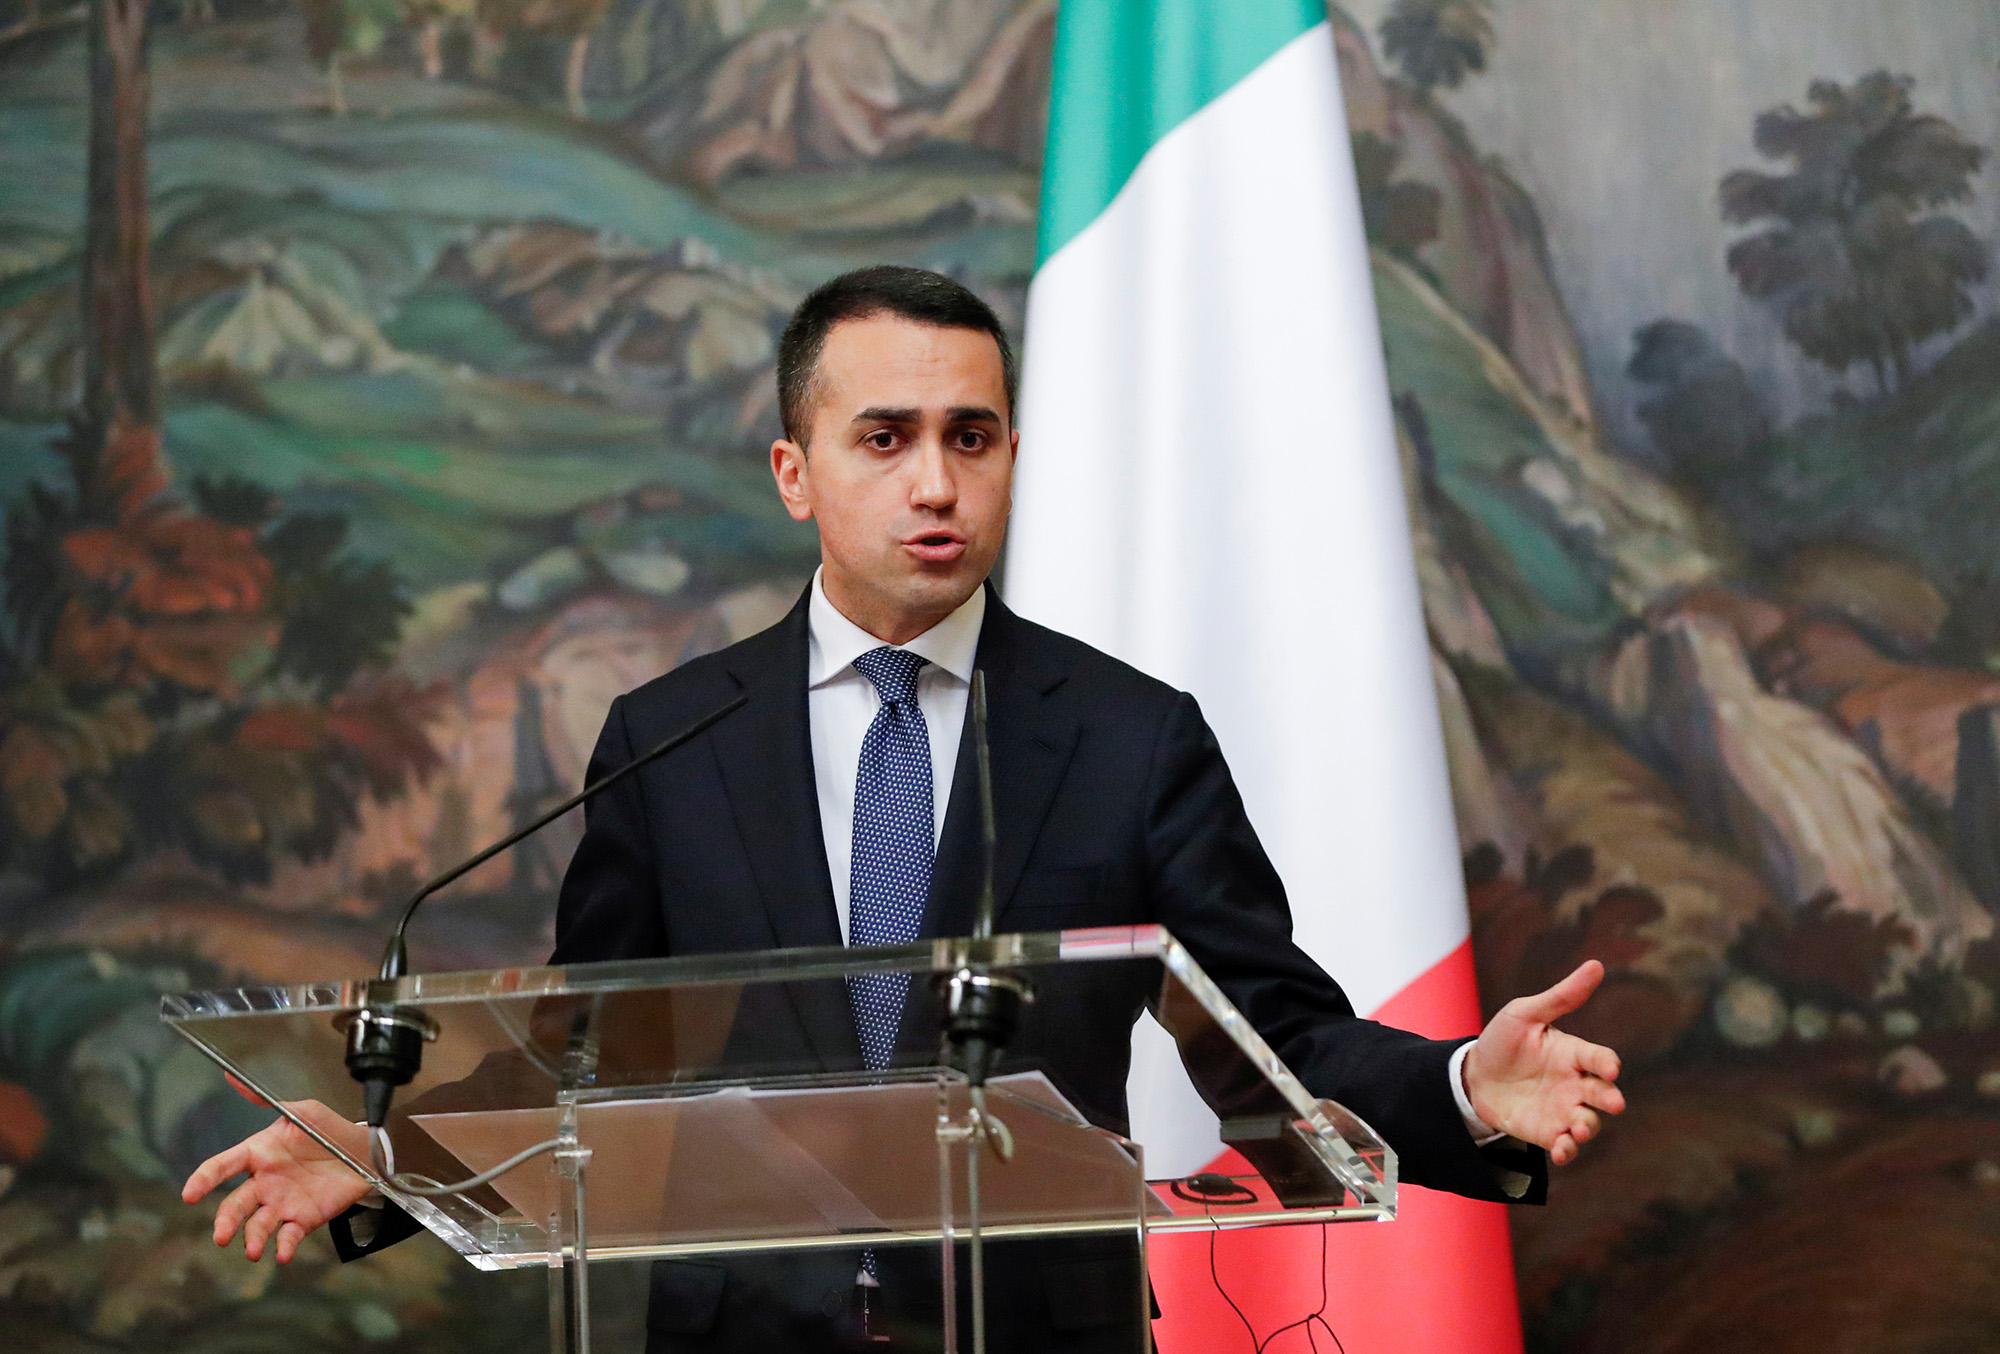 Italian Foreign Minister Luigi Di Maio speaks during a press conference after talks with his Russian counterpart Sergei Lavrov in Moscow, Russia, February 17.